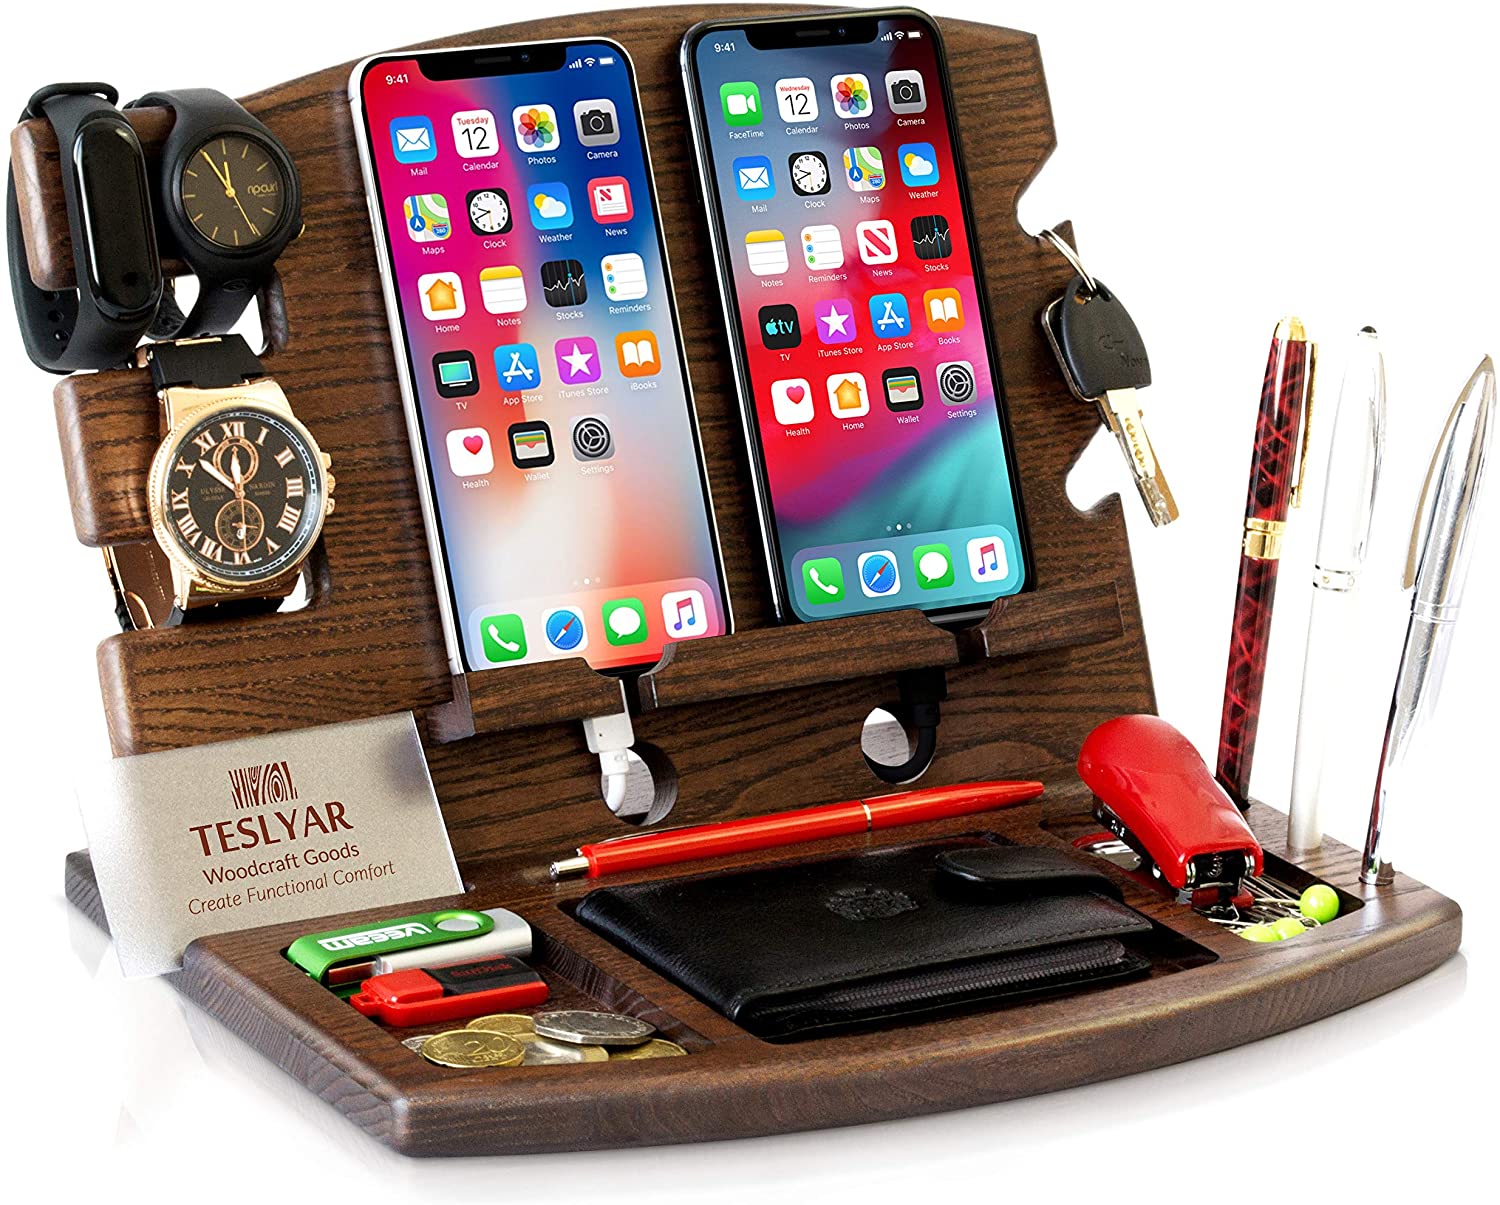 Dual Phone Holder made of Wood = Hand crafted Wood Designs